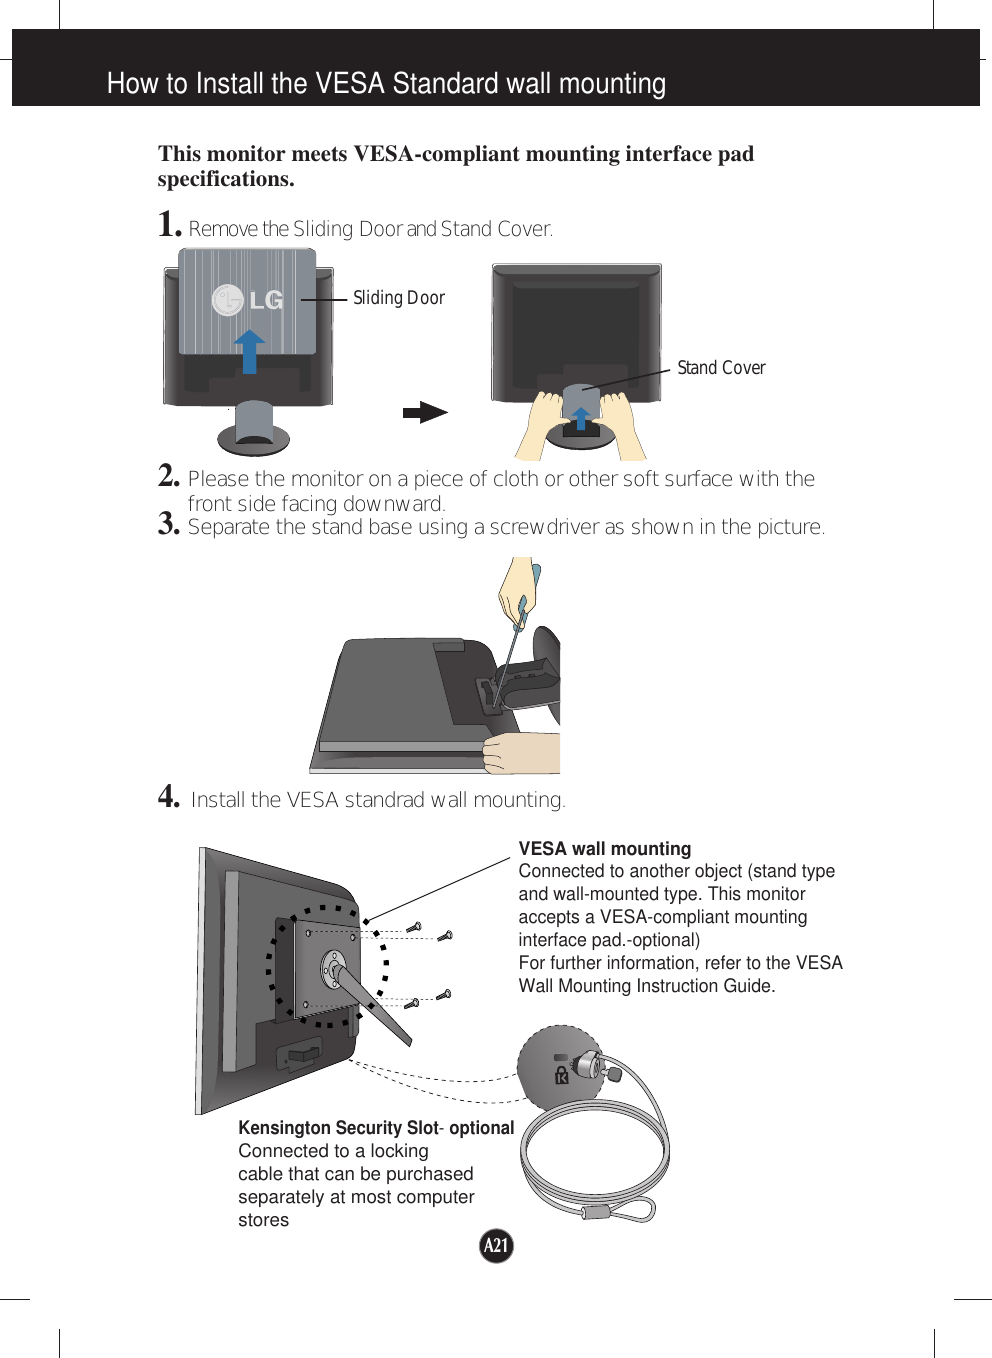 A21How to Install the VESA Standard wall mountingThis monitor meets VESA-compliant mounting interface padspecifications.1. Remove the Sliding Doorand Stand Cover.2.Please the monitor on a piece of cloth or other soft surface with thefront side facing downward.3.Separate the stand base using a screwdriver as shown in the picture.4.Install the VESA standrad wall mounting.VESA wall mountingConnected to another object (stand typeand wall-mounted type. This monitoraccepts a VESA-compliant mountinginterface pad.-optional)For further information, refer to the VESAWall Mounting Instruction Guide.Kensington Security Slot- optionalConnected to a locking cable that can be purchasedseparately at most computerstoresSliding DoorStand Cover